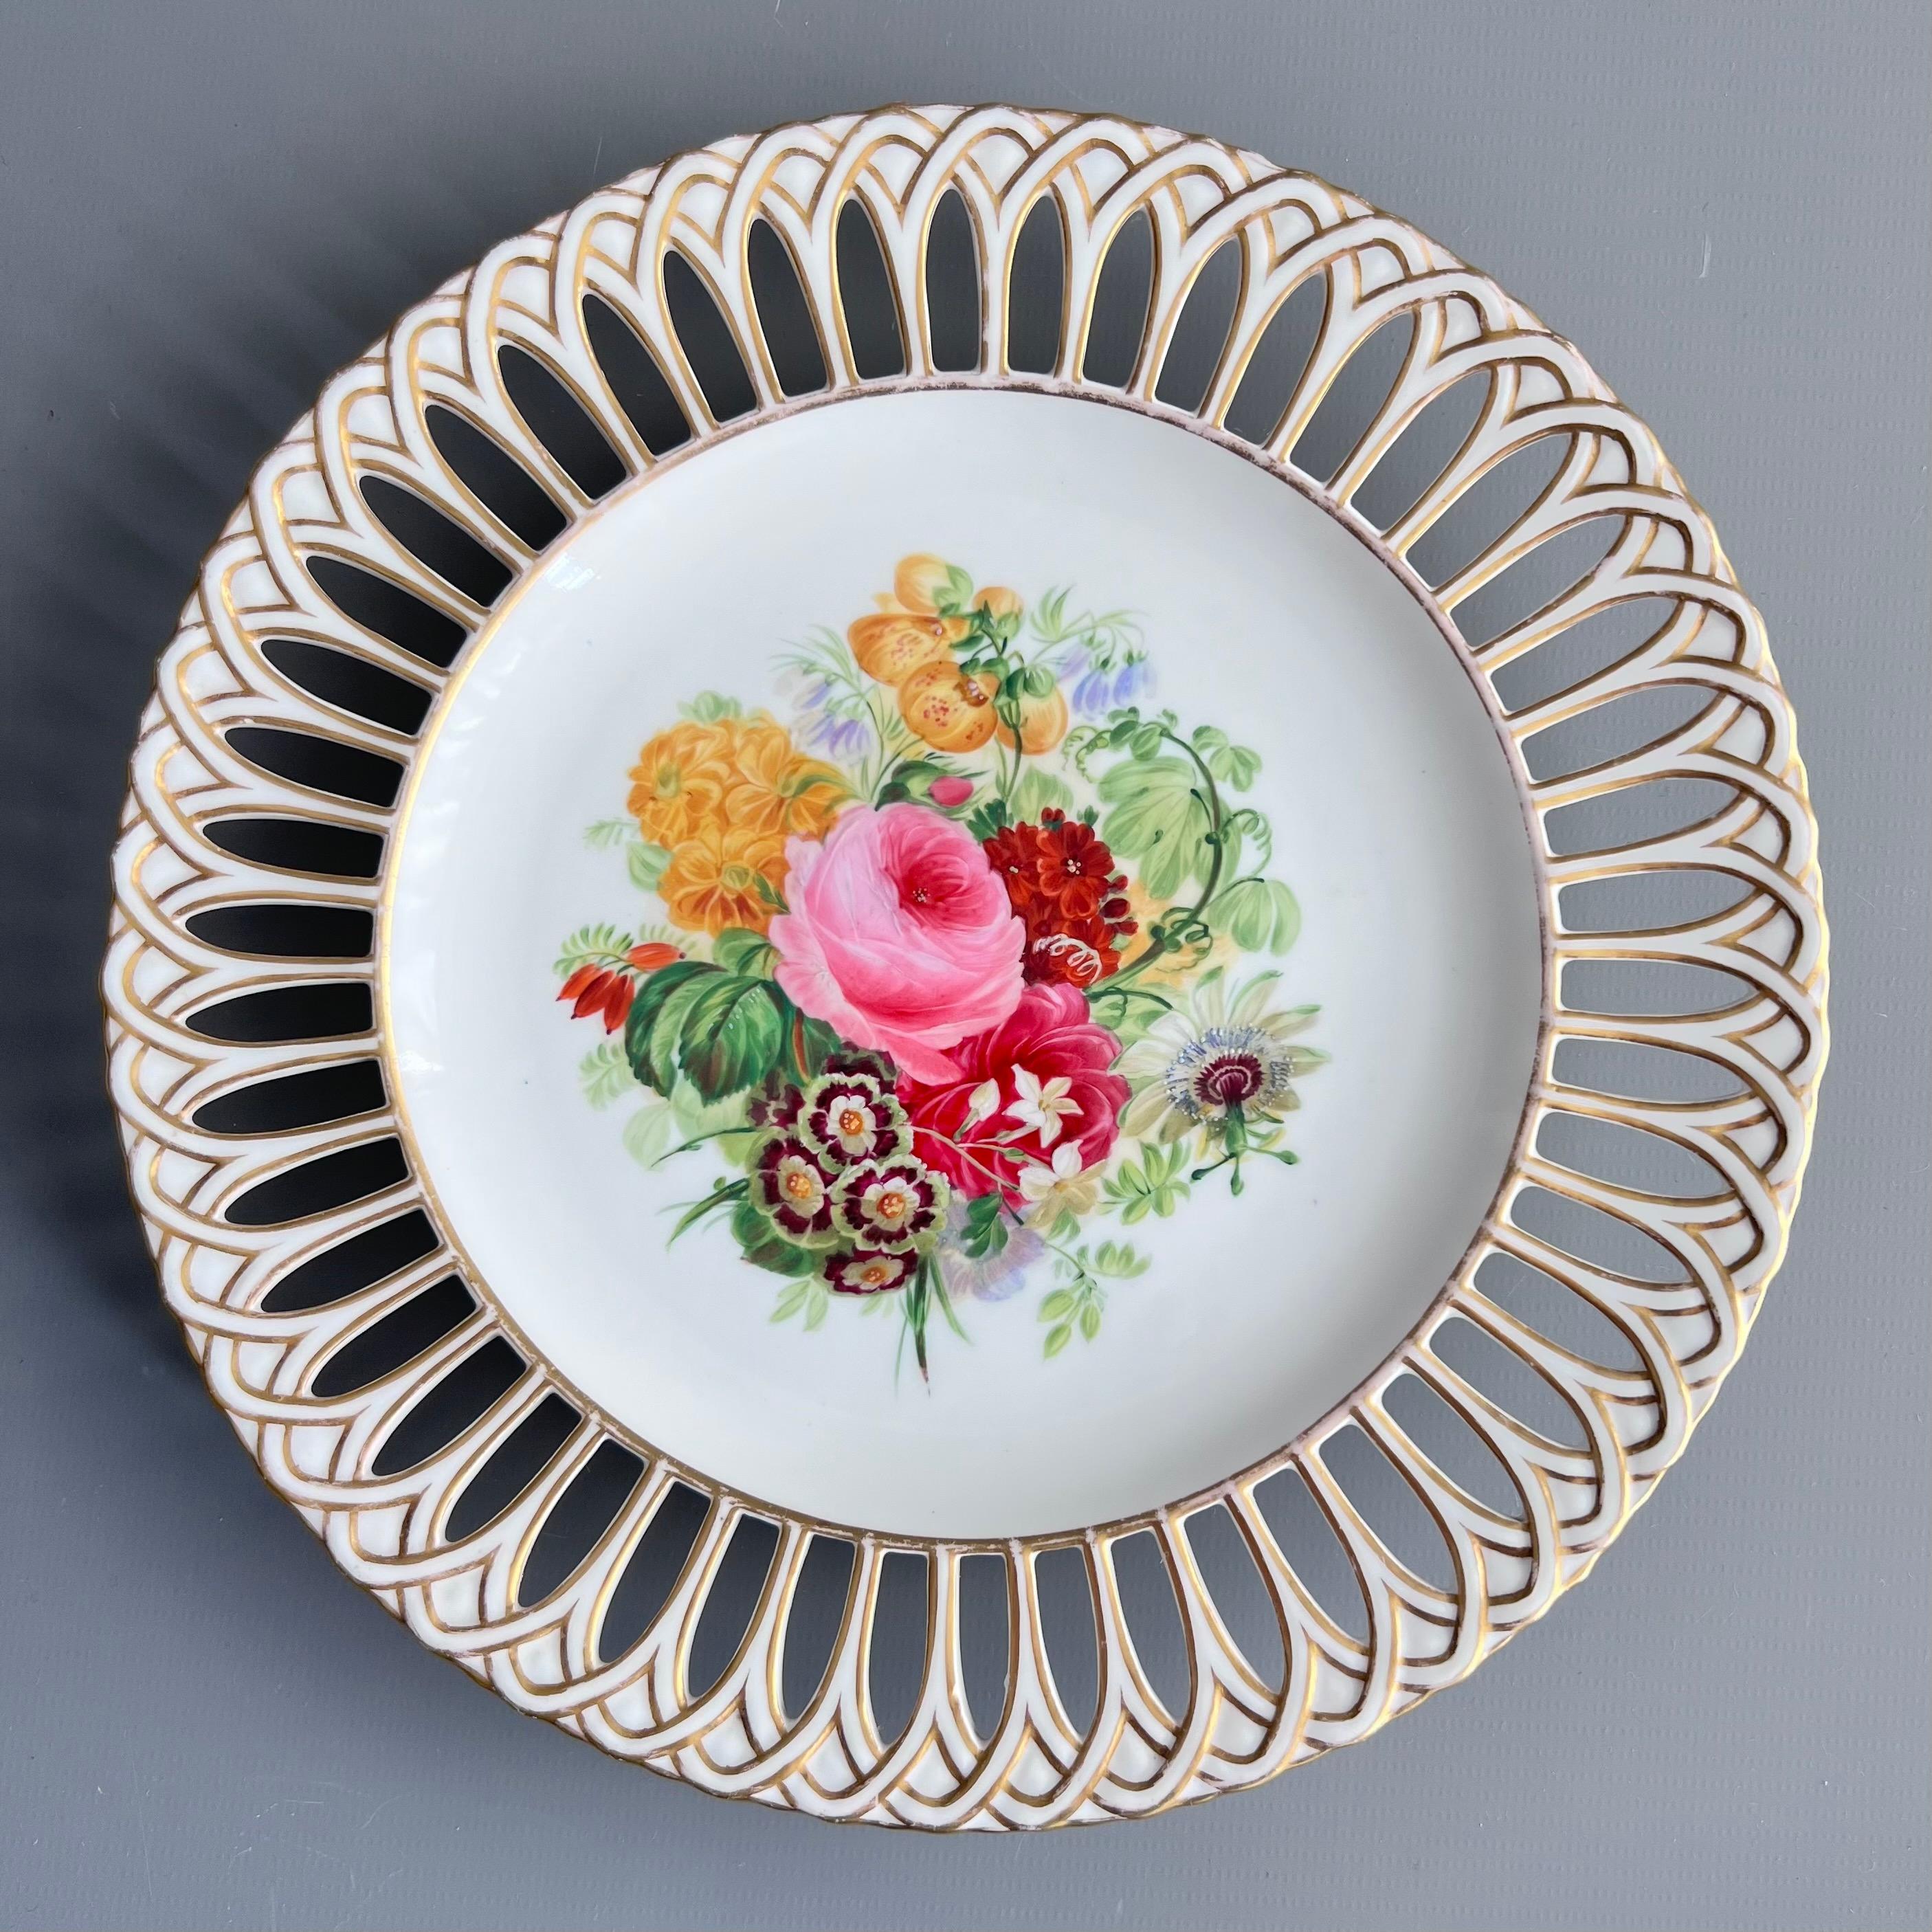 Copeland Set of 8 plates, Reticulated, Sublime Flowers by Greatbatch, 1848 For Sale 8